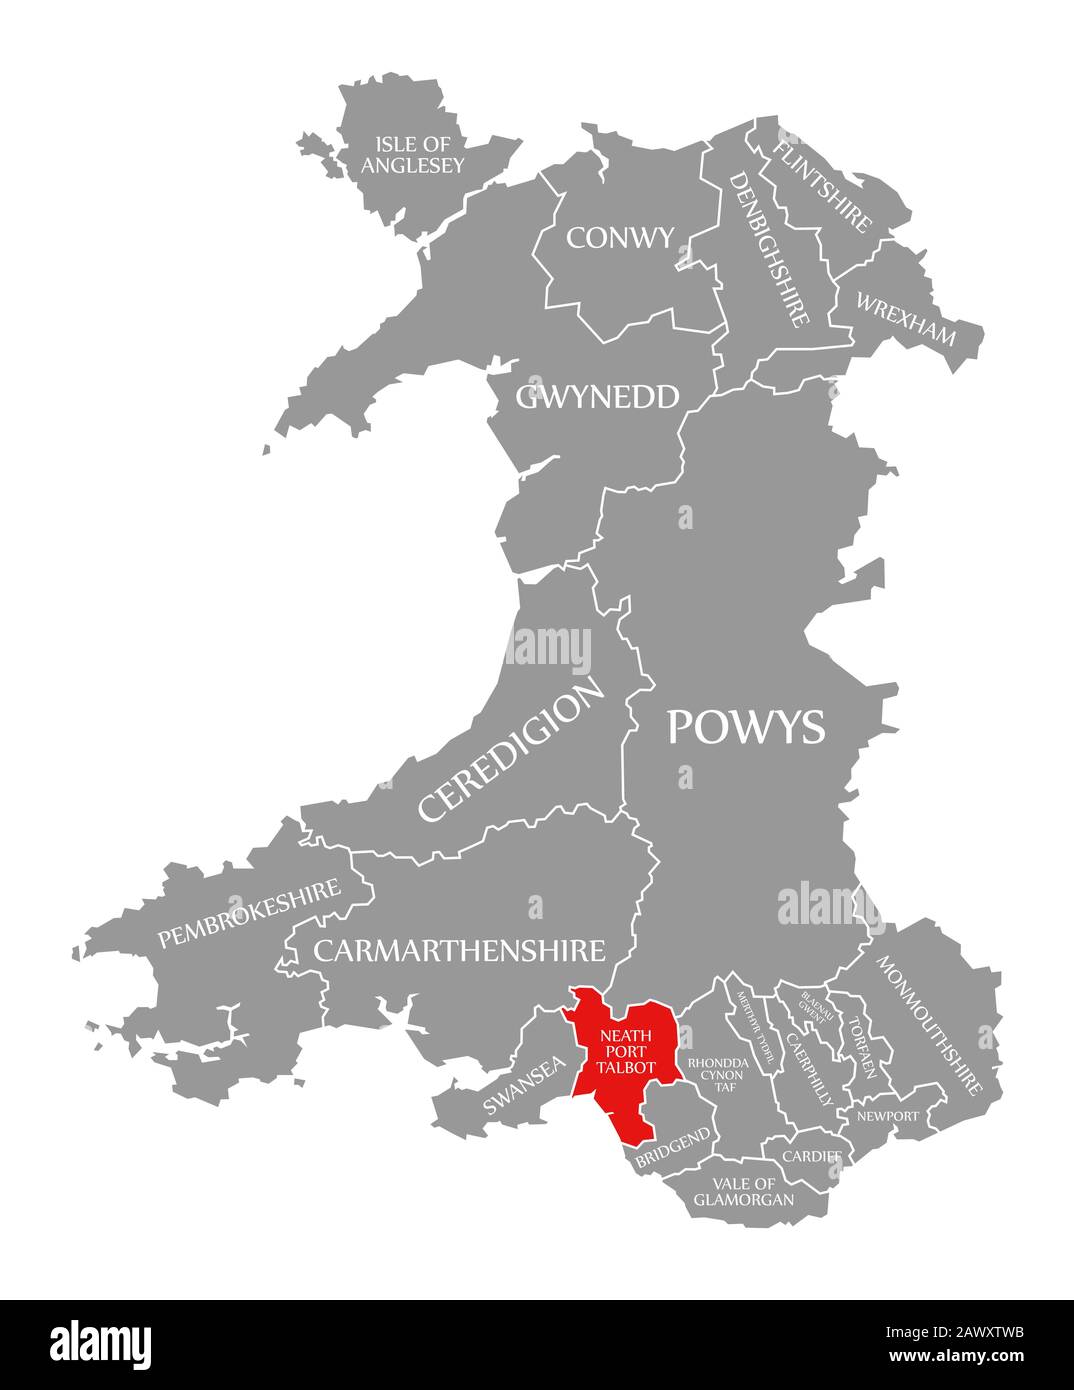 Neath Port Talbot red highlighted in map of Wales Stock Photo